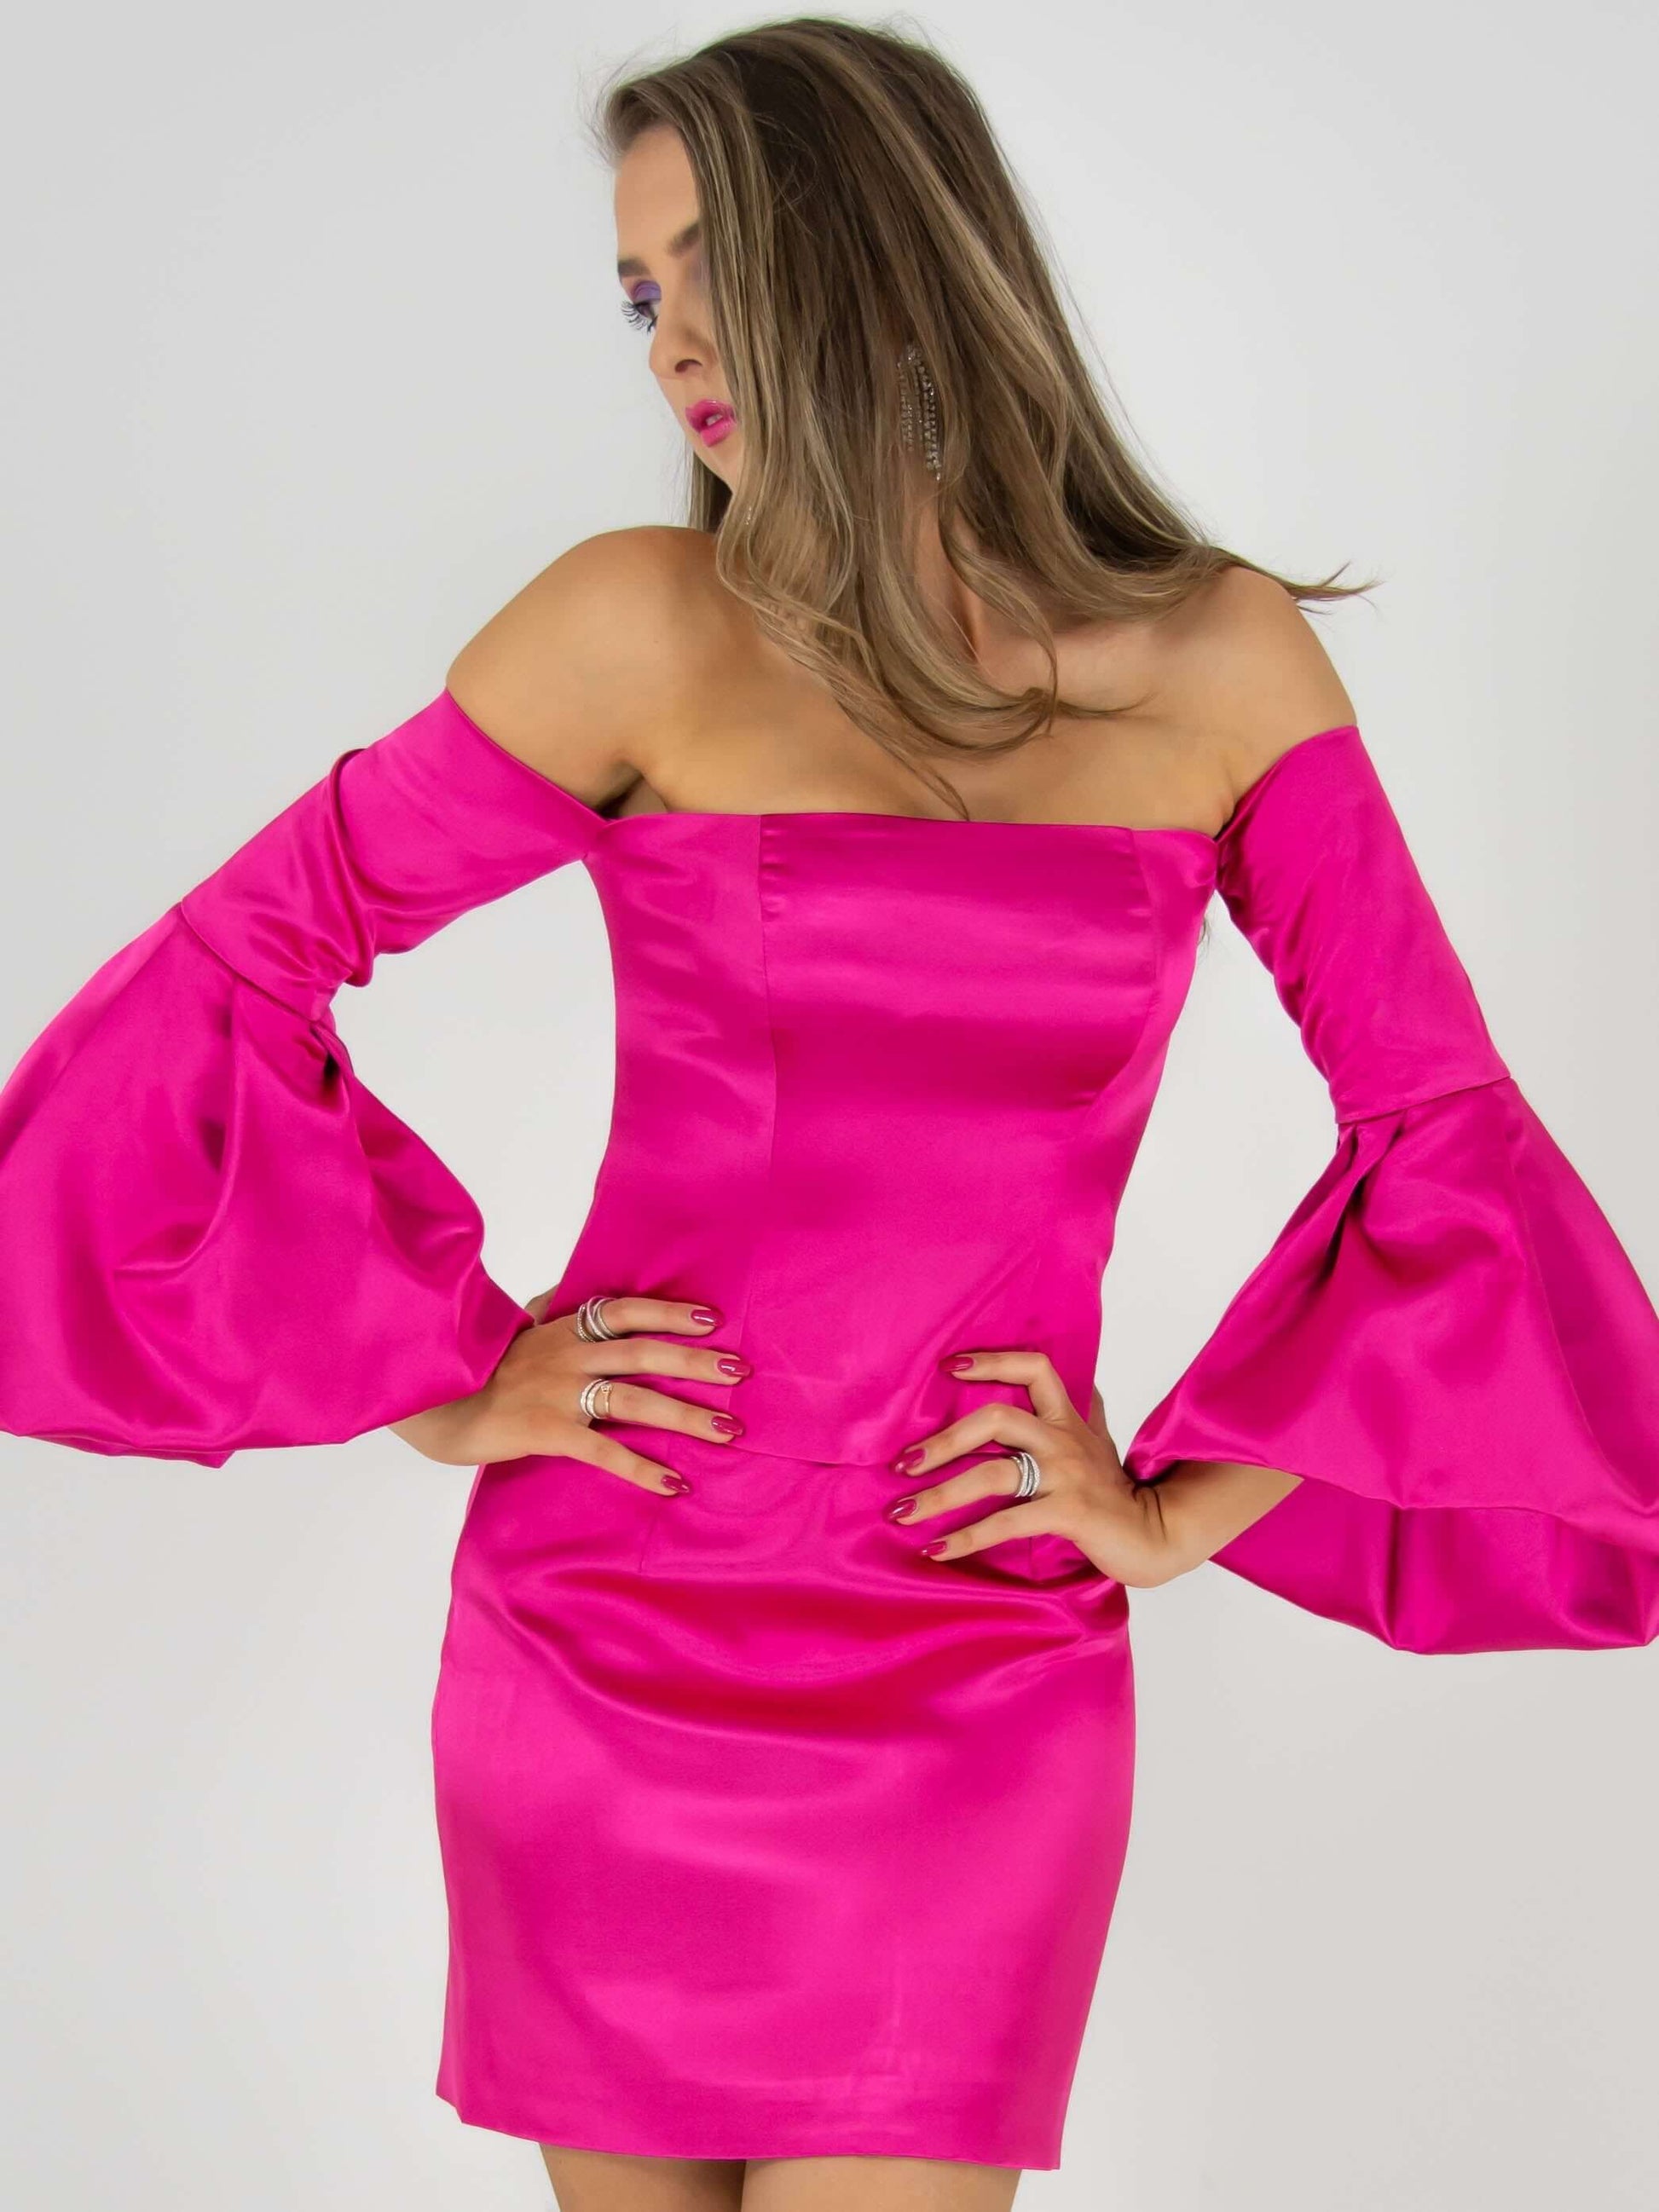 Vision of Love Off-Shoulder Blouse - Pink by Tia Dorraine Women's Luxury Fashion Designer Clothing Brand